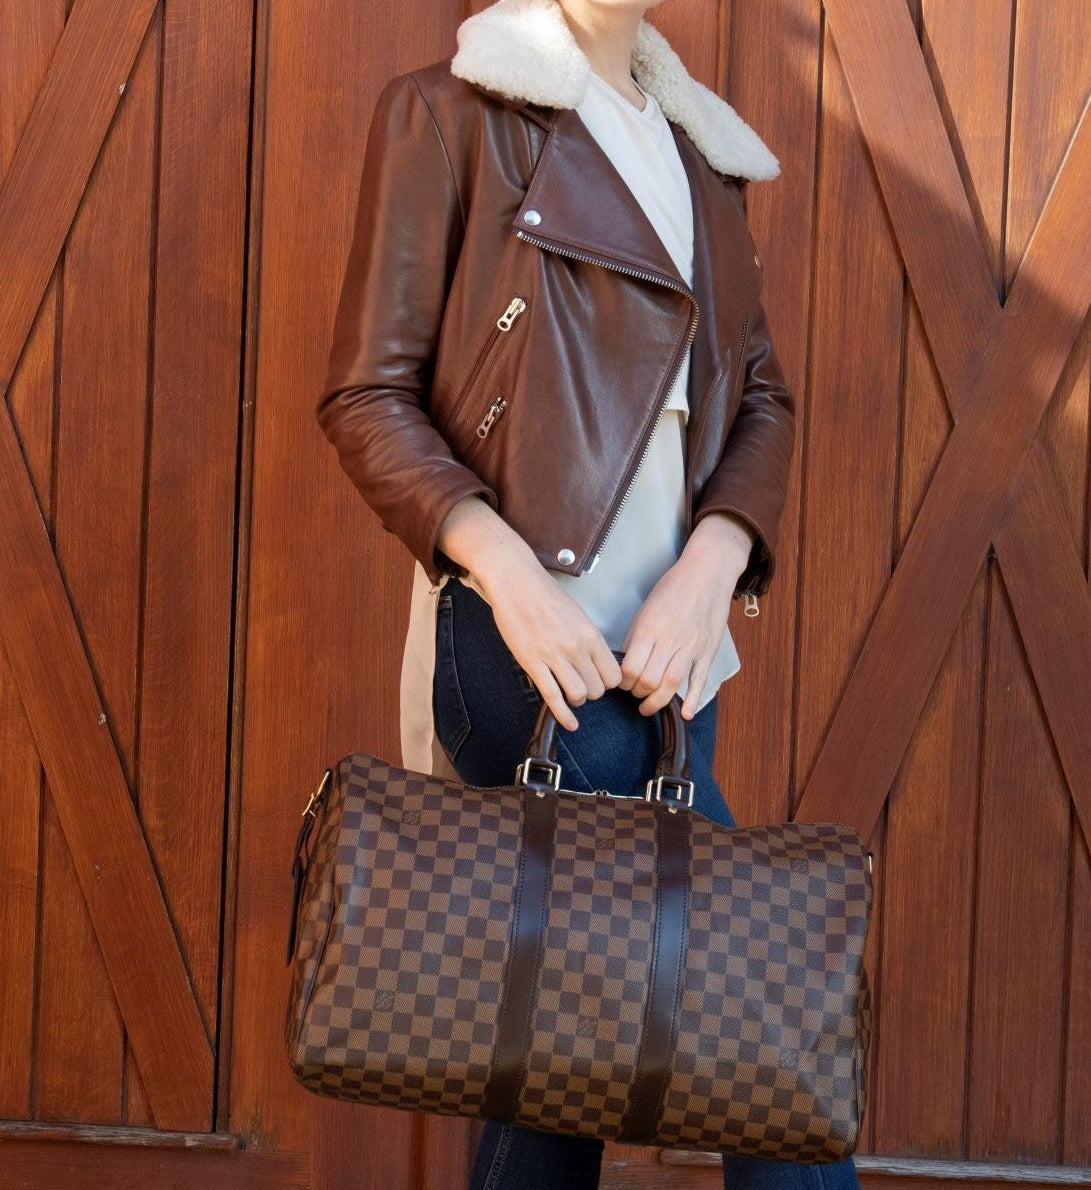 Louis Vuitton keepall 45 bandouliere damier ebene – Lady Clara's Collection